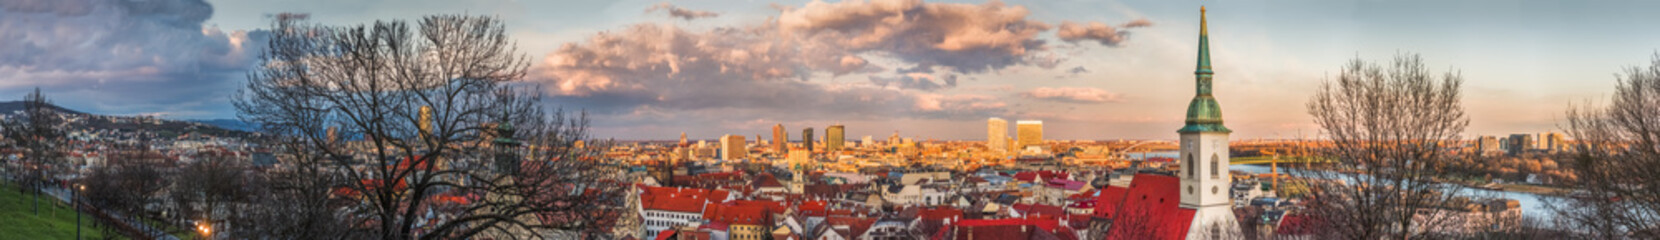 Wall Mural - Panoramic View of Cityscape of Bratislava, Slovakia with St. Martin's Cathedral at Sunset